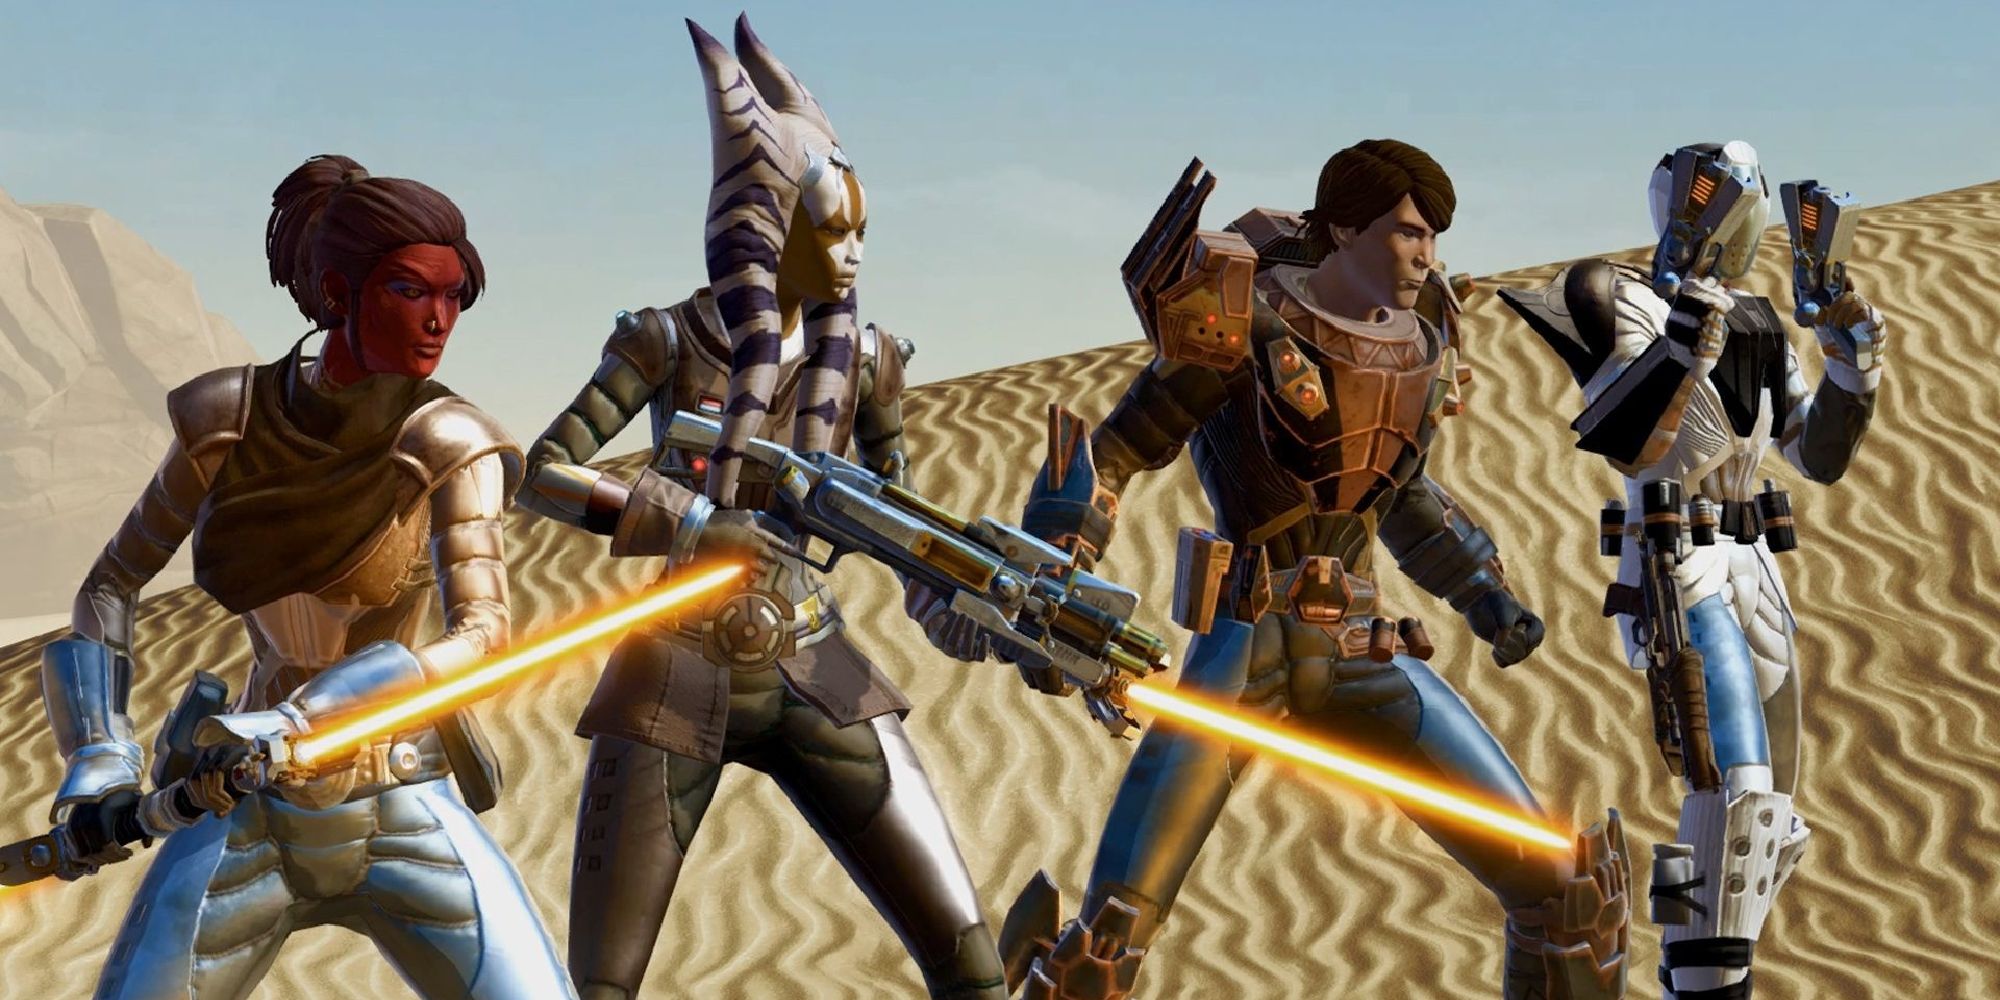 Star Wars: The Old Republic characters